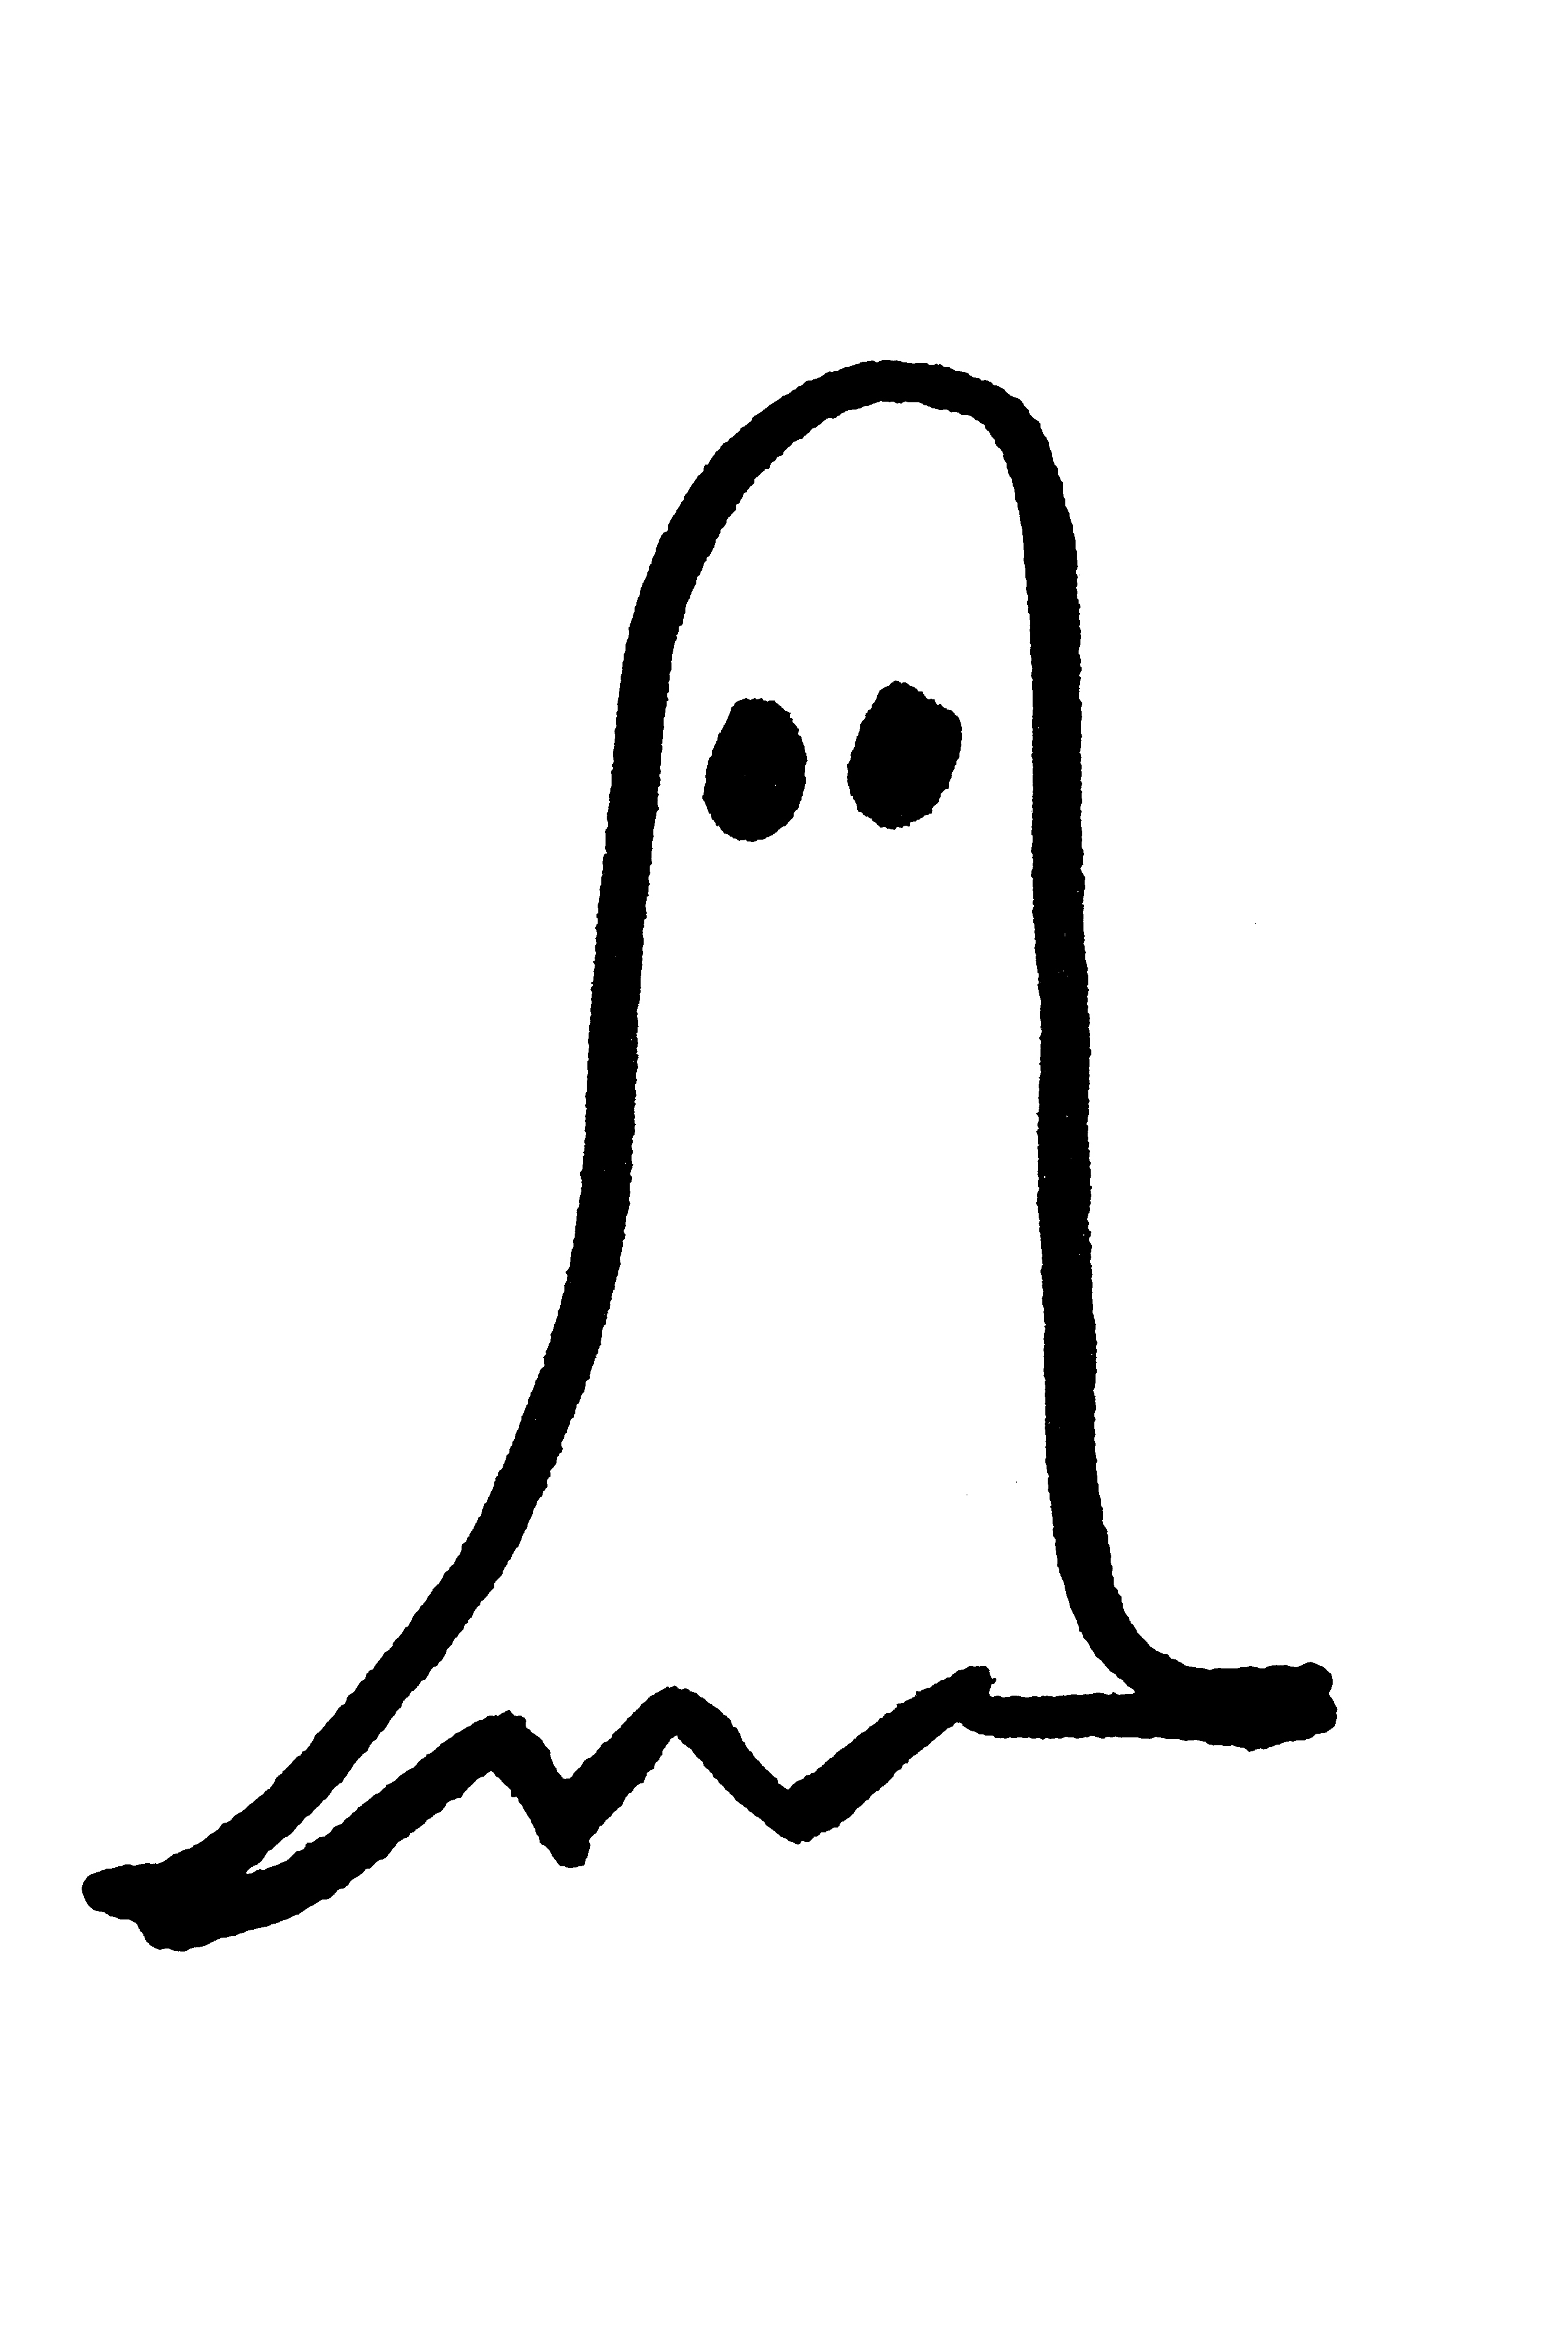 Halloween Ghost Hand Drawn Clip Art Picture | Free Photograph ...